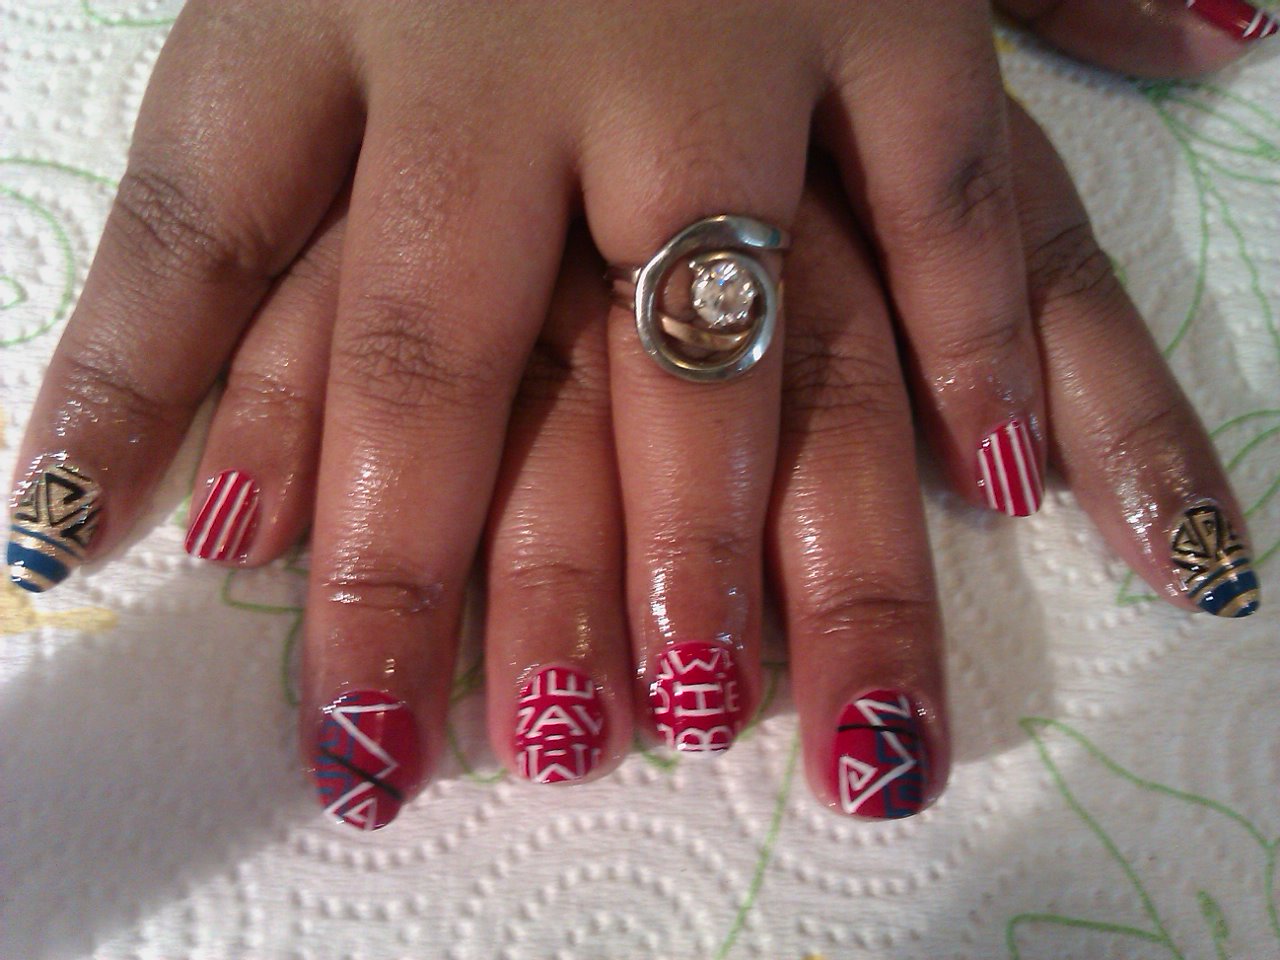 Red White and Black Nail Design